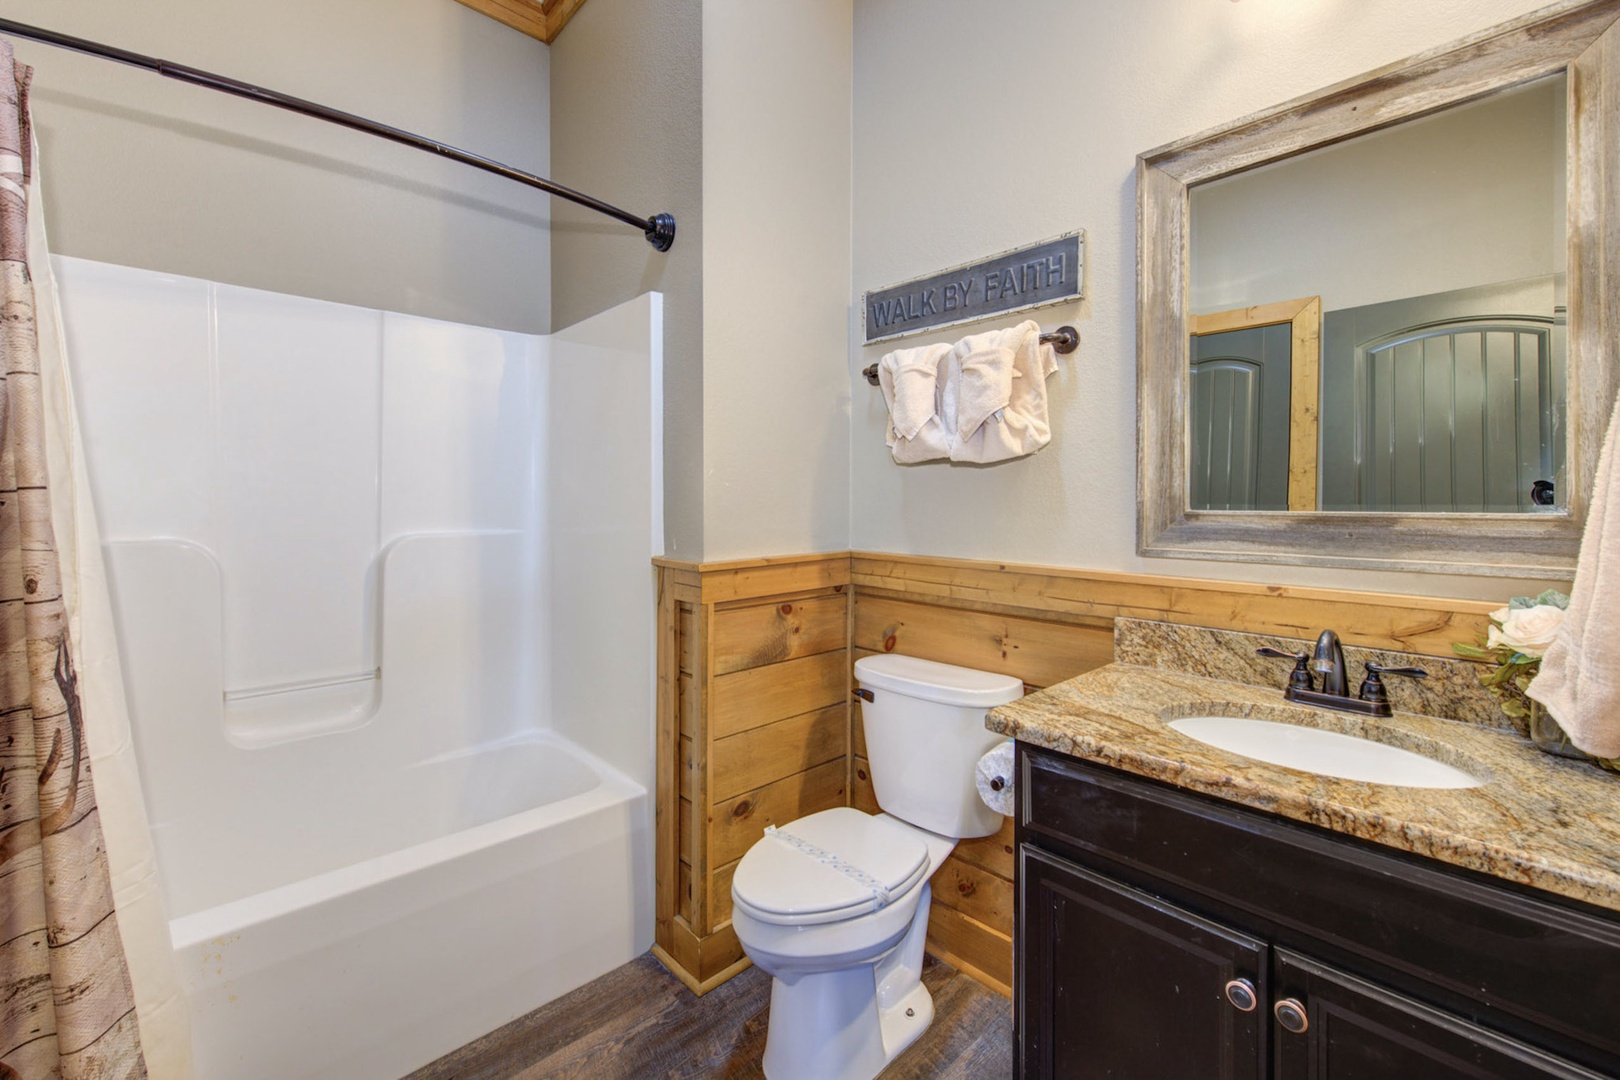 This ensuite bathroom includes a single vanity & shower/tub combo